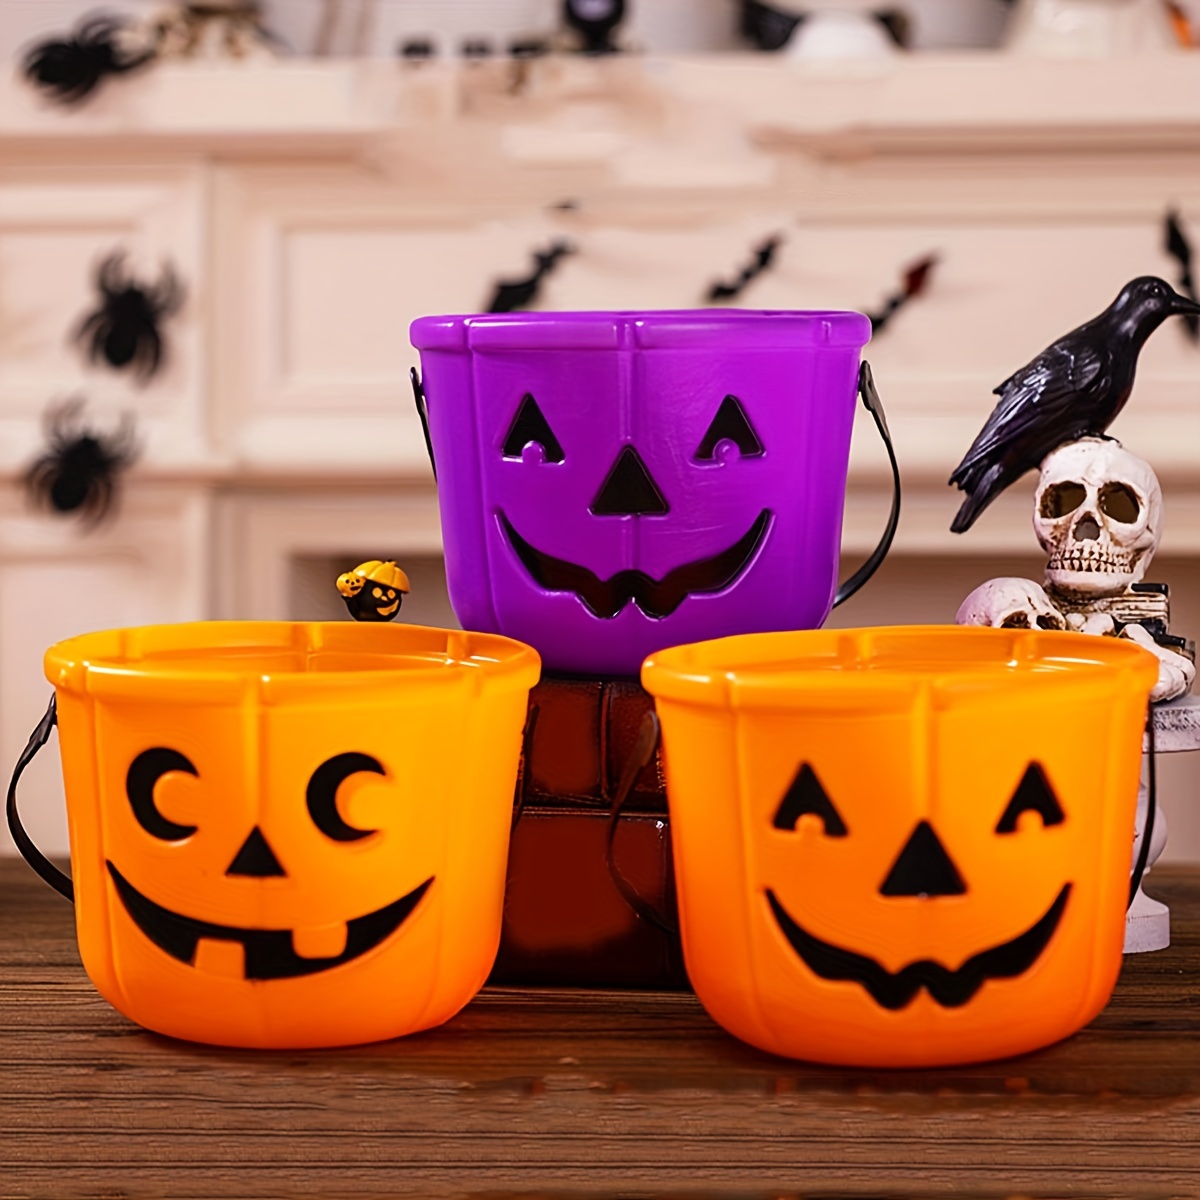  Boo Basket Trick or Treat Bags Pumpkin Bins with Handles  Decorative Cloth Organizer Storage Boxes Halloween Baskets for Adult : Home  & Kitchen